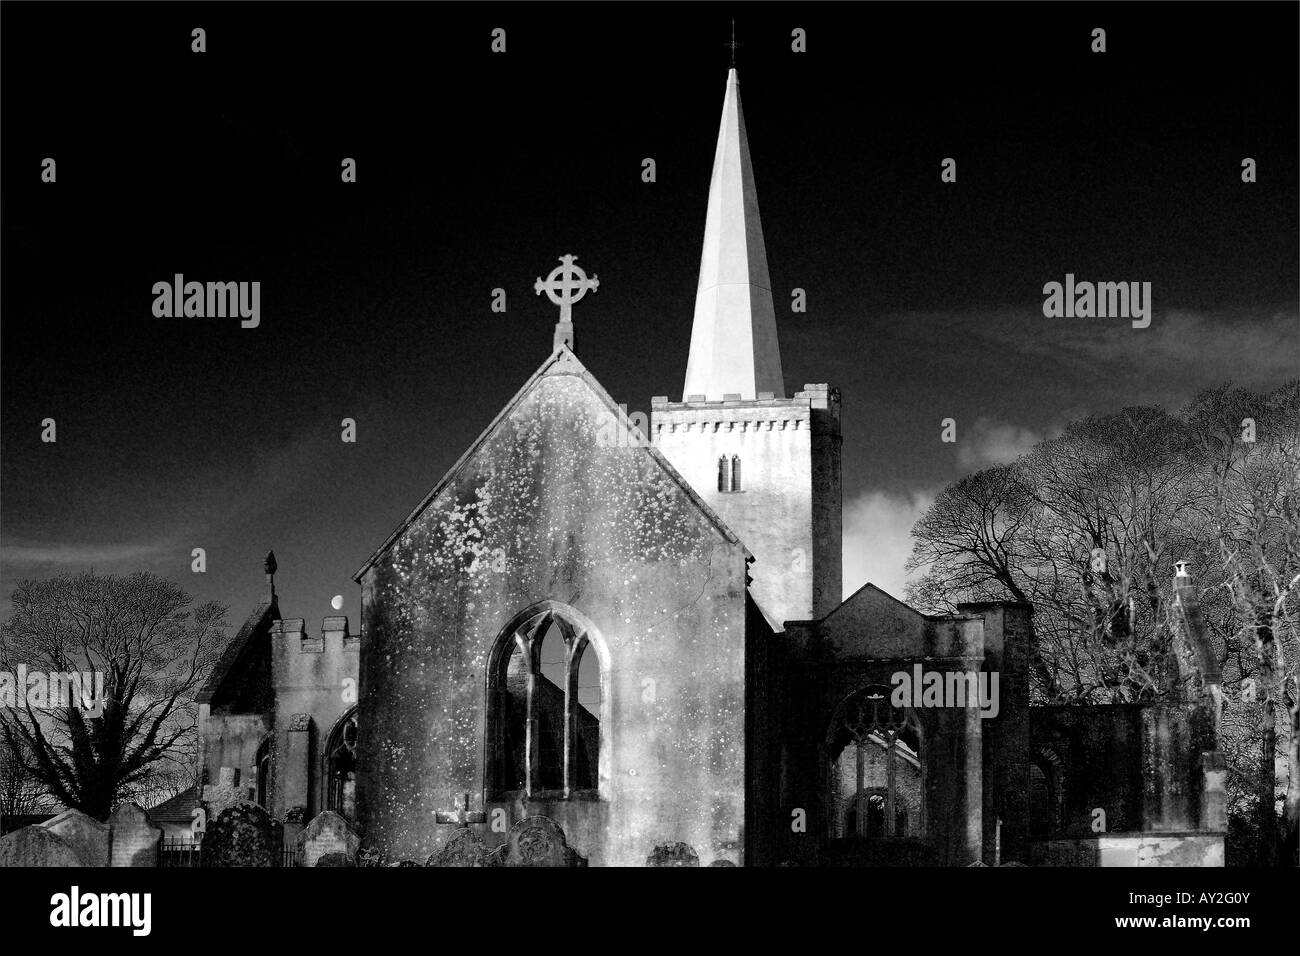 Atmospheric Infrared Style monochrome image of a graveyard and derelict church with glassless windows and no roof Stock Photo